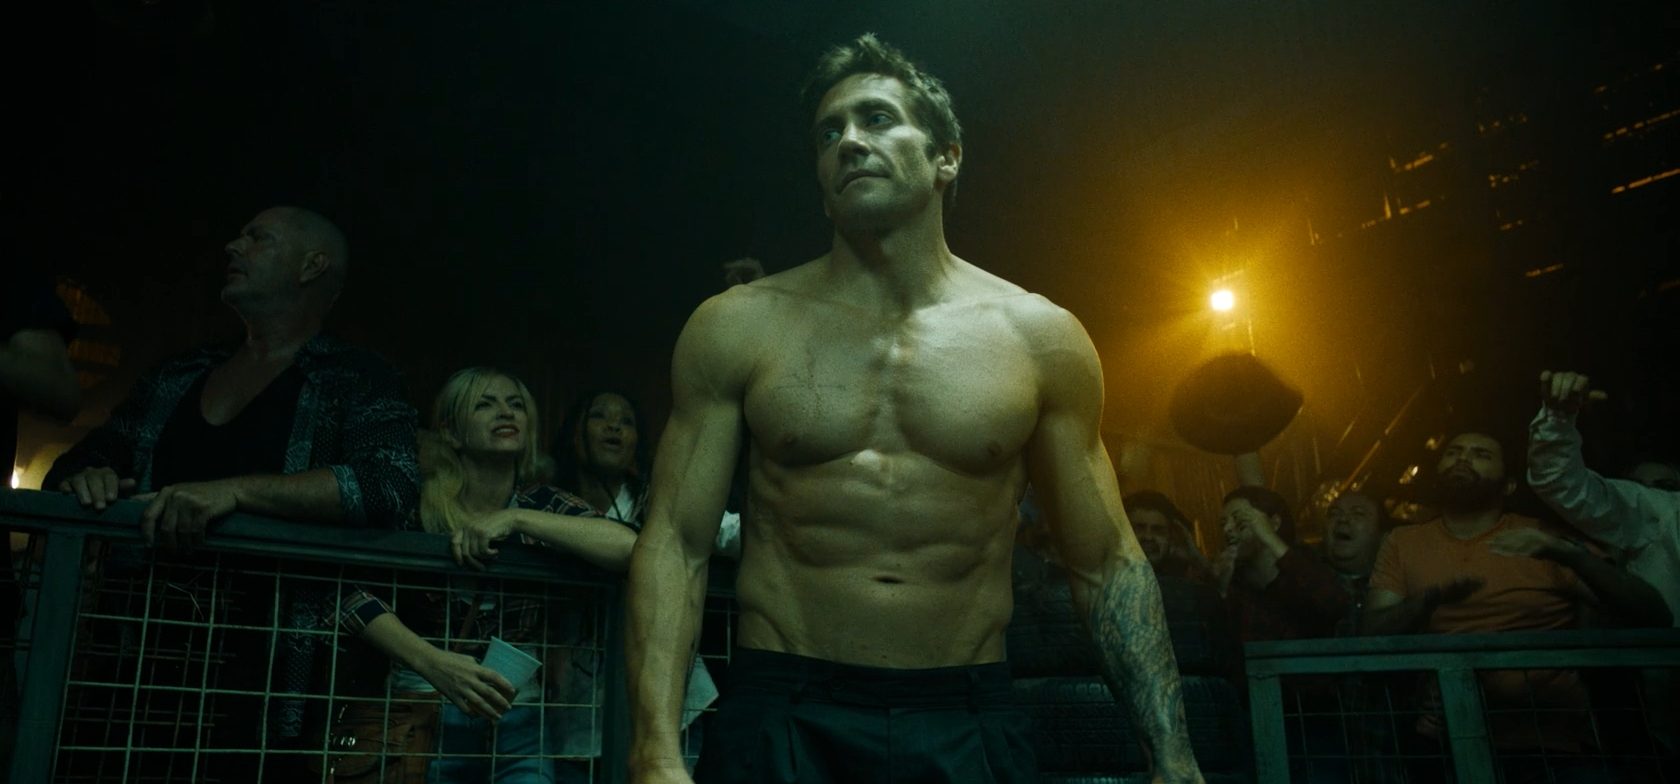 Did Jake Gyllenhaal Build Muscles for Road House?